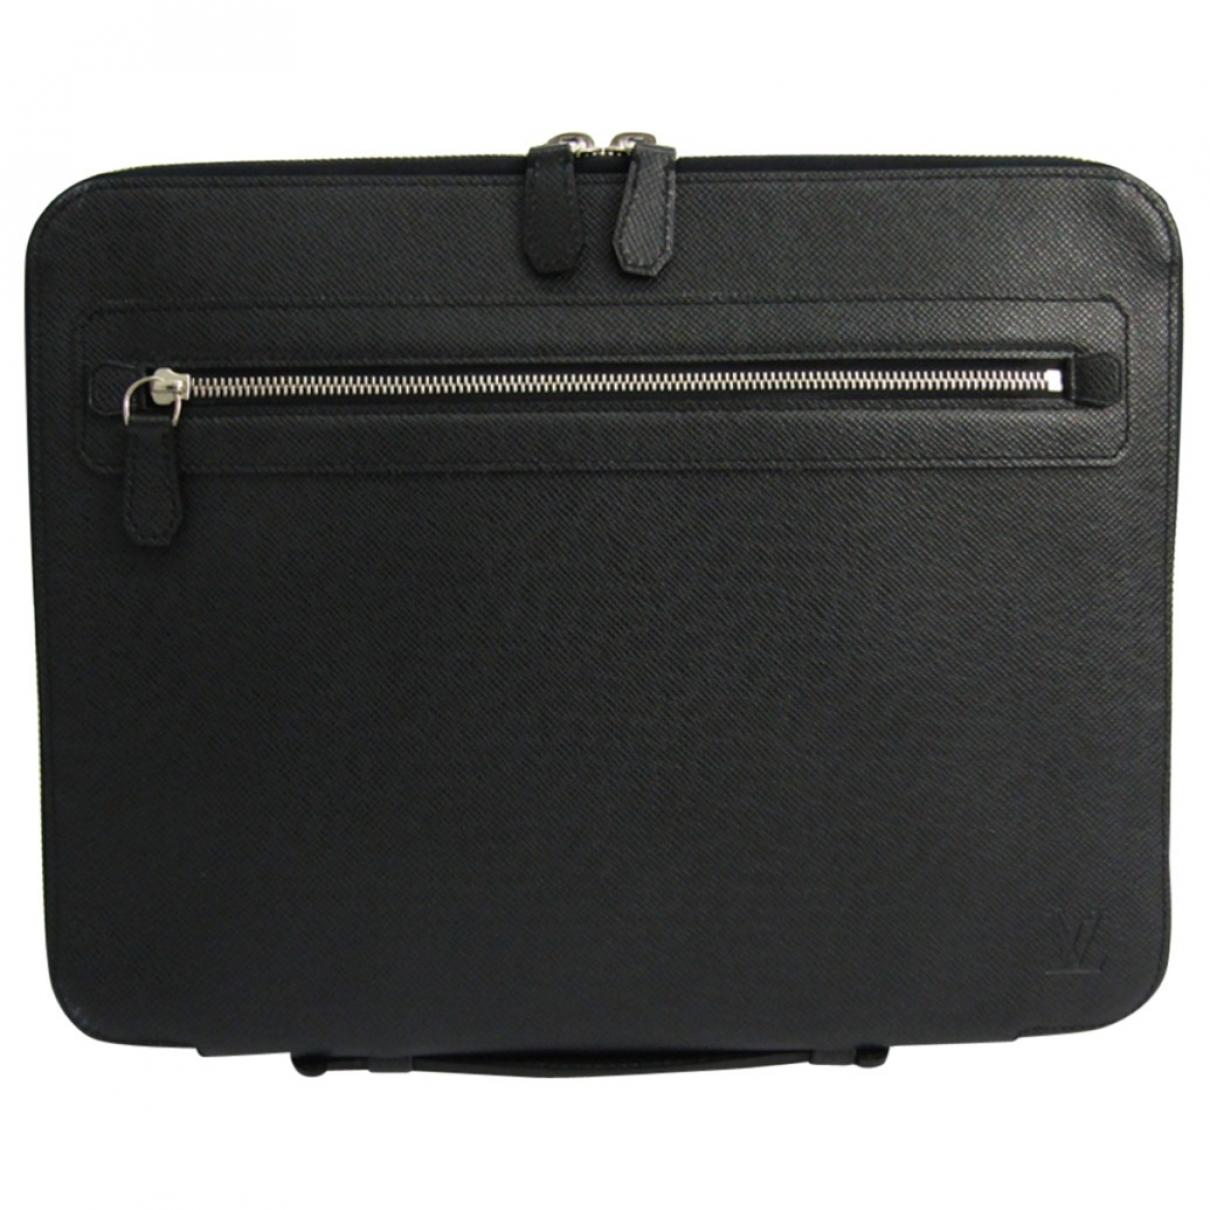 Louis Vuitton Black Leather Small Bag, Wallets & Cases in Black for Men - Lyst